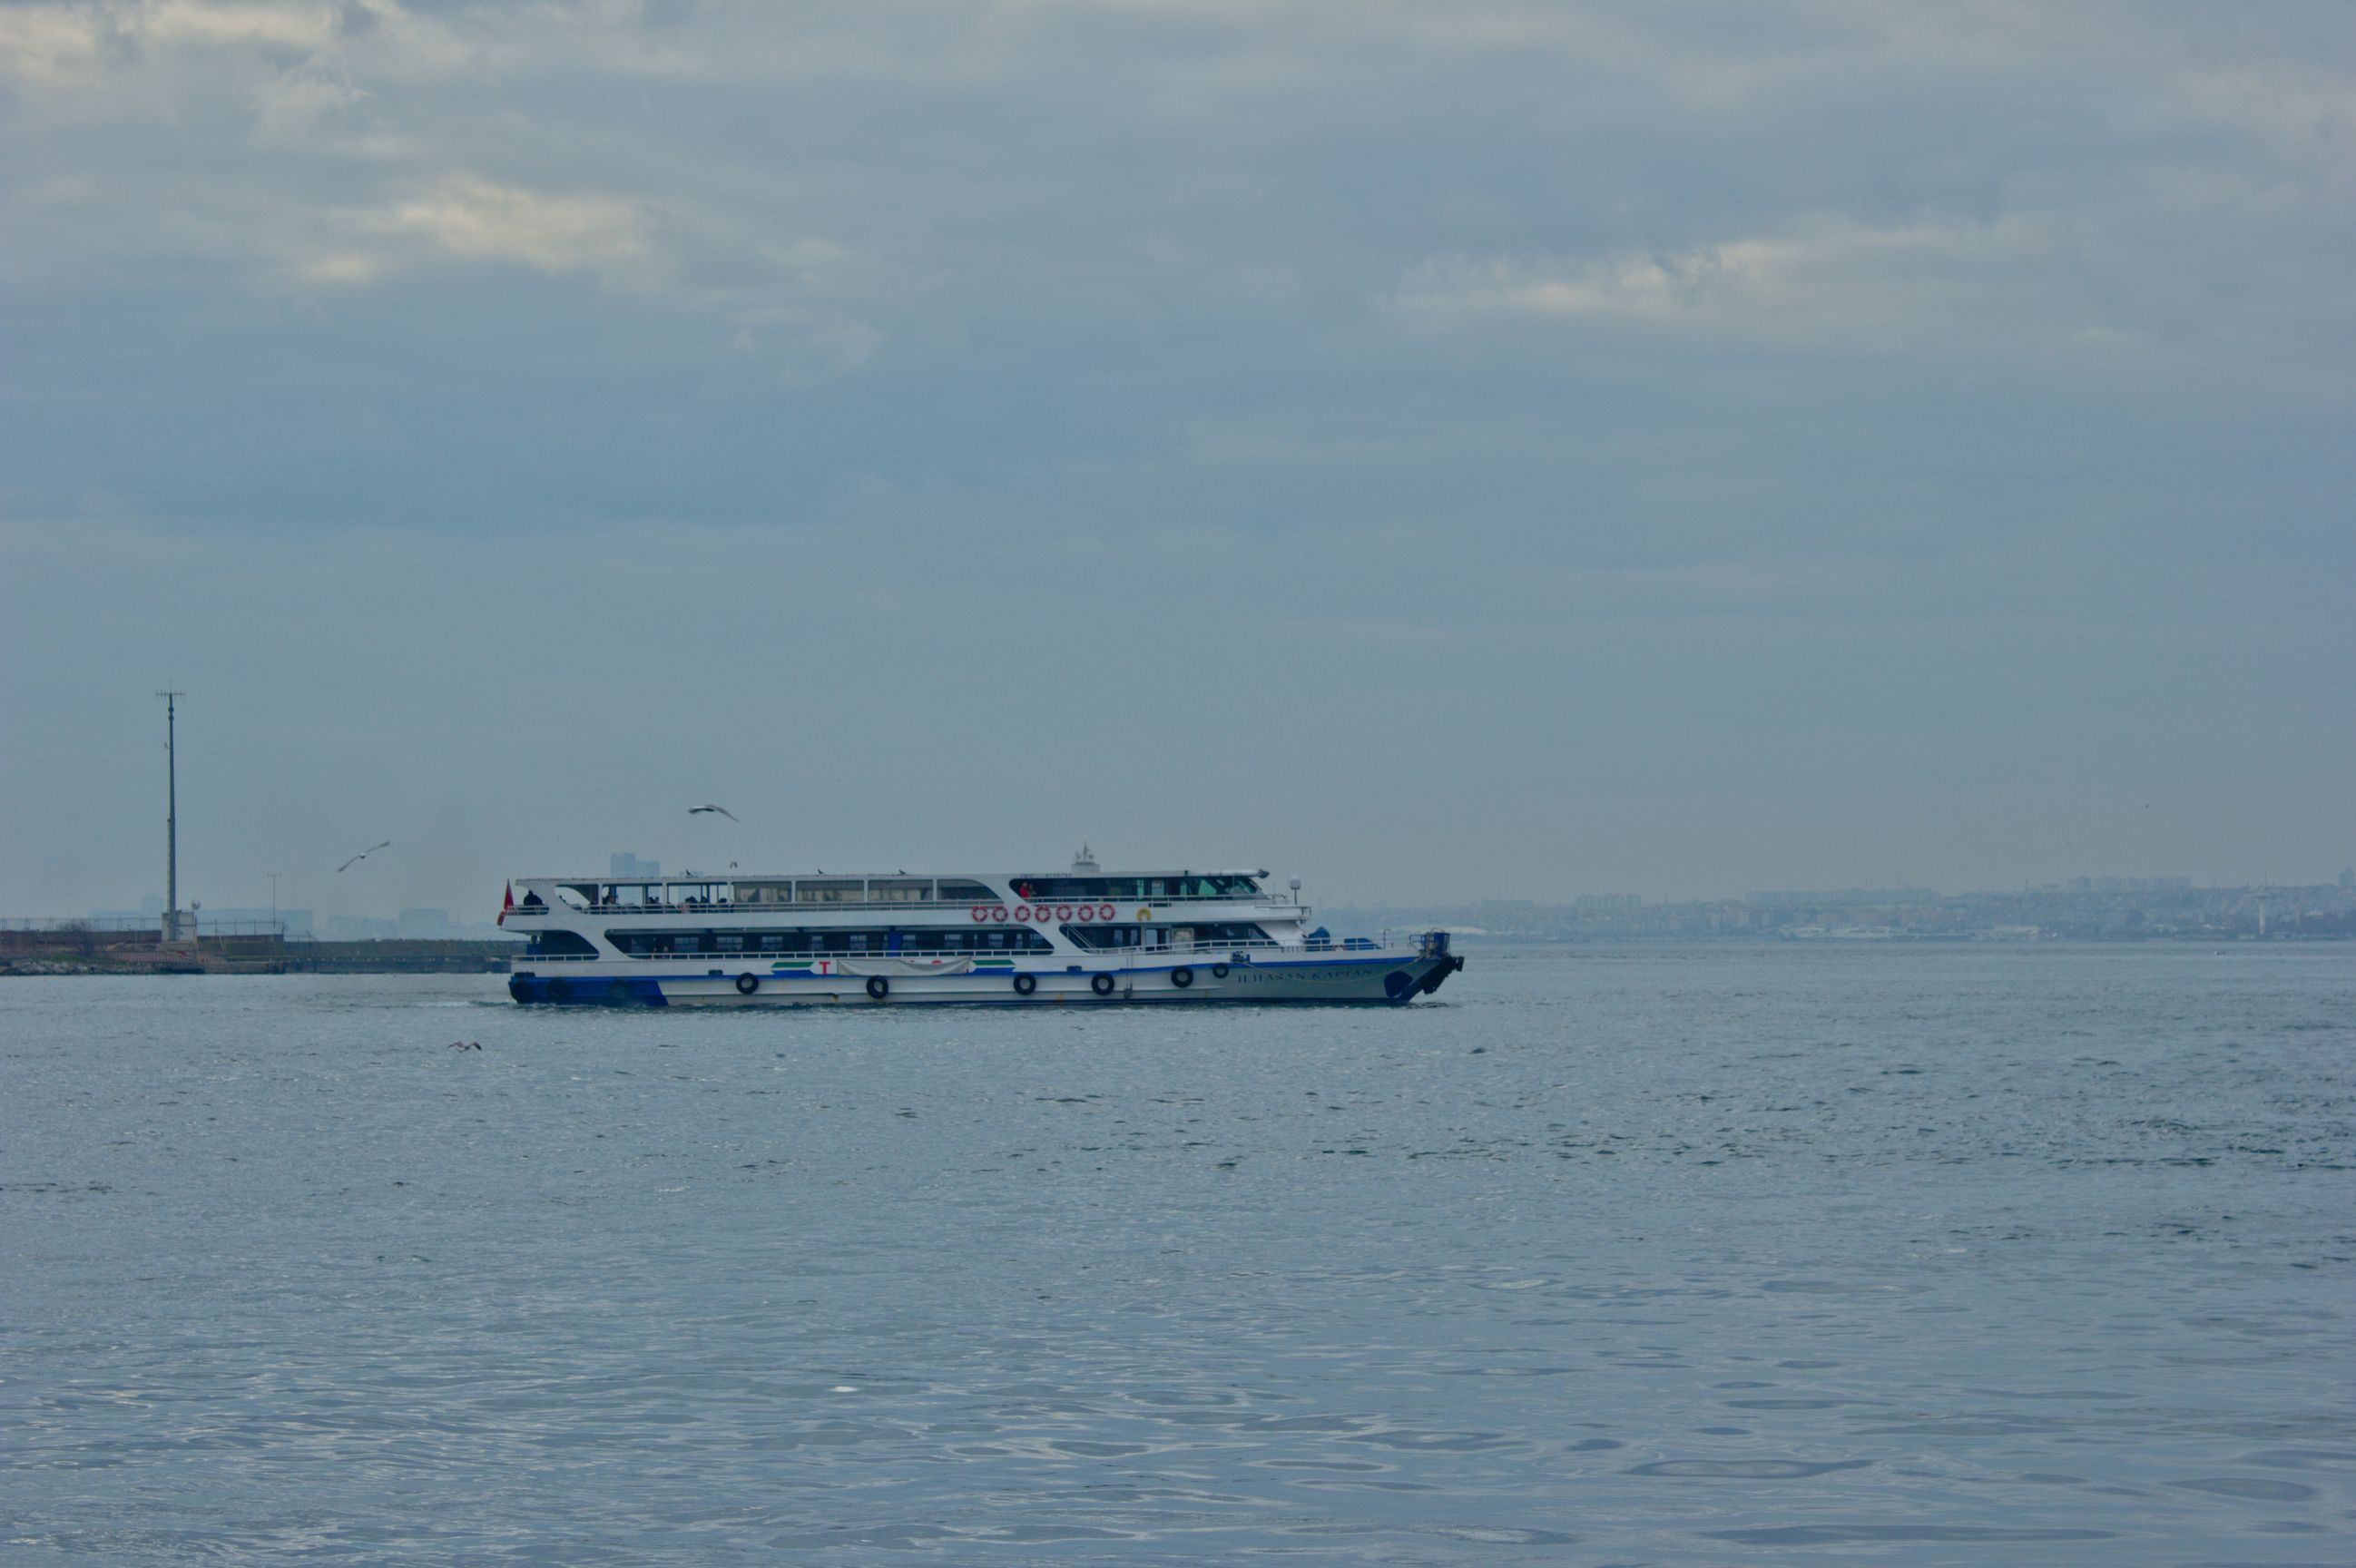 A ferry boat